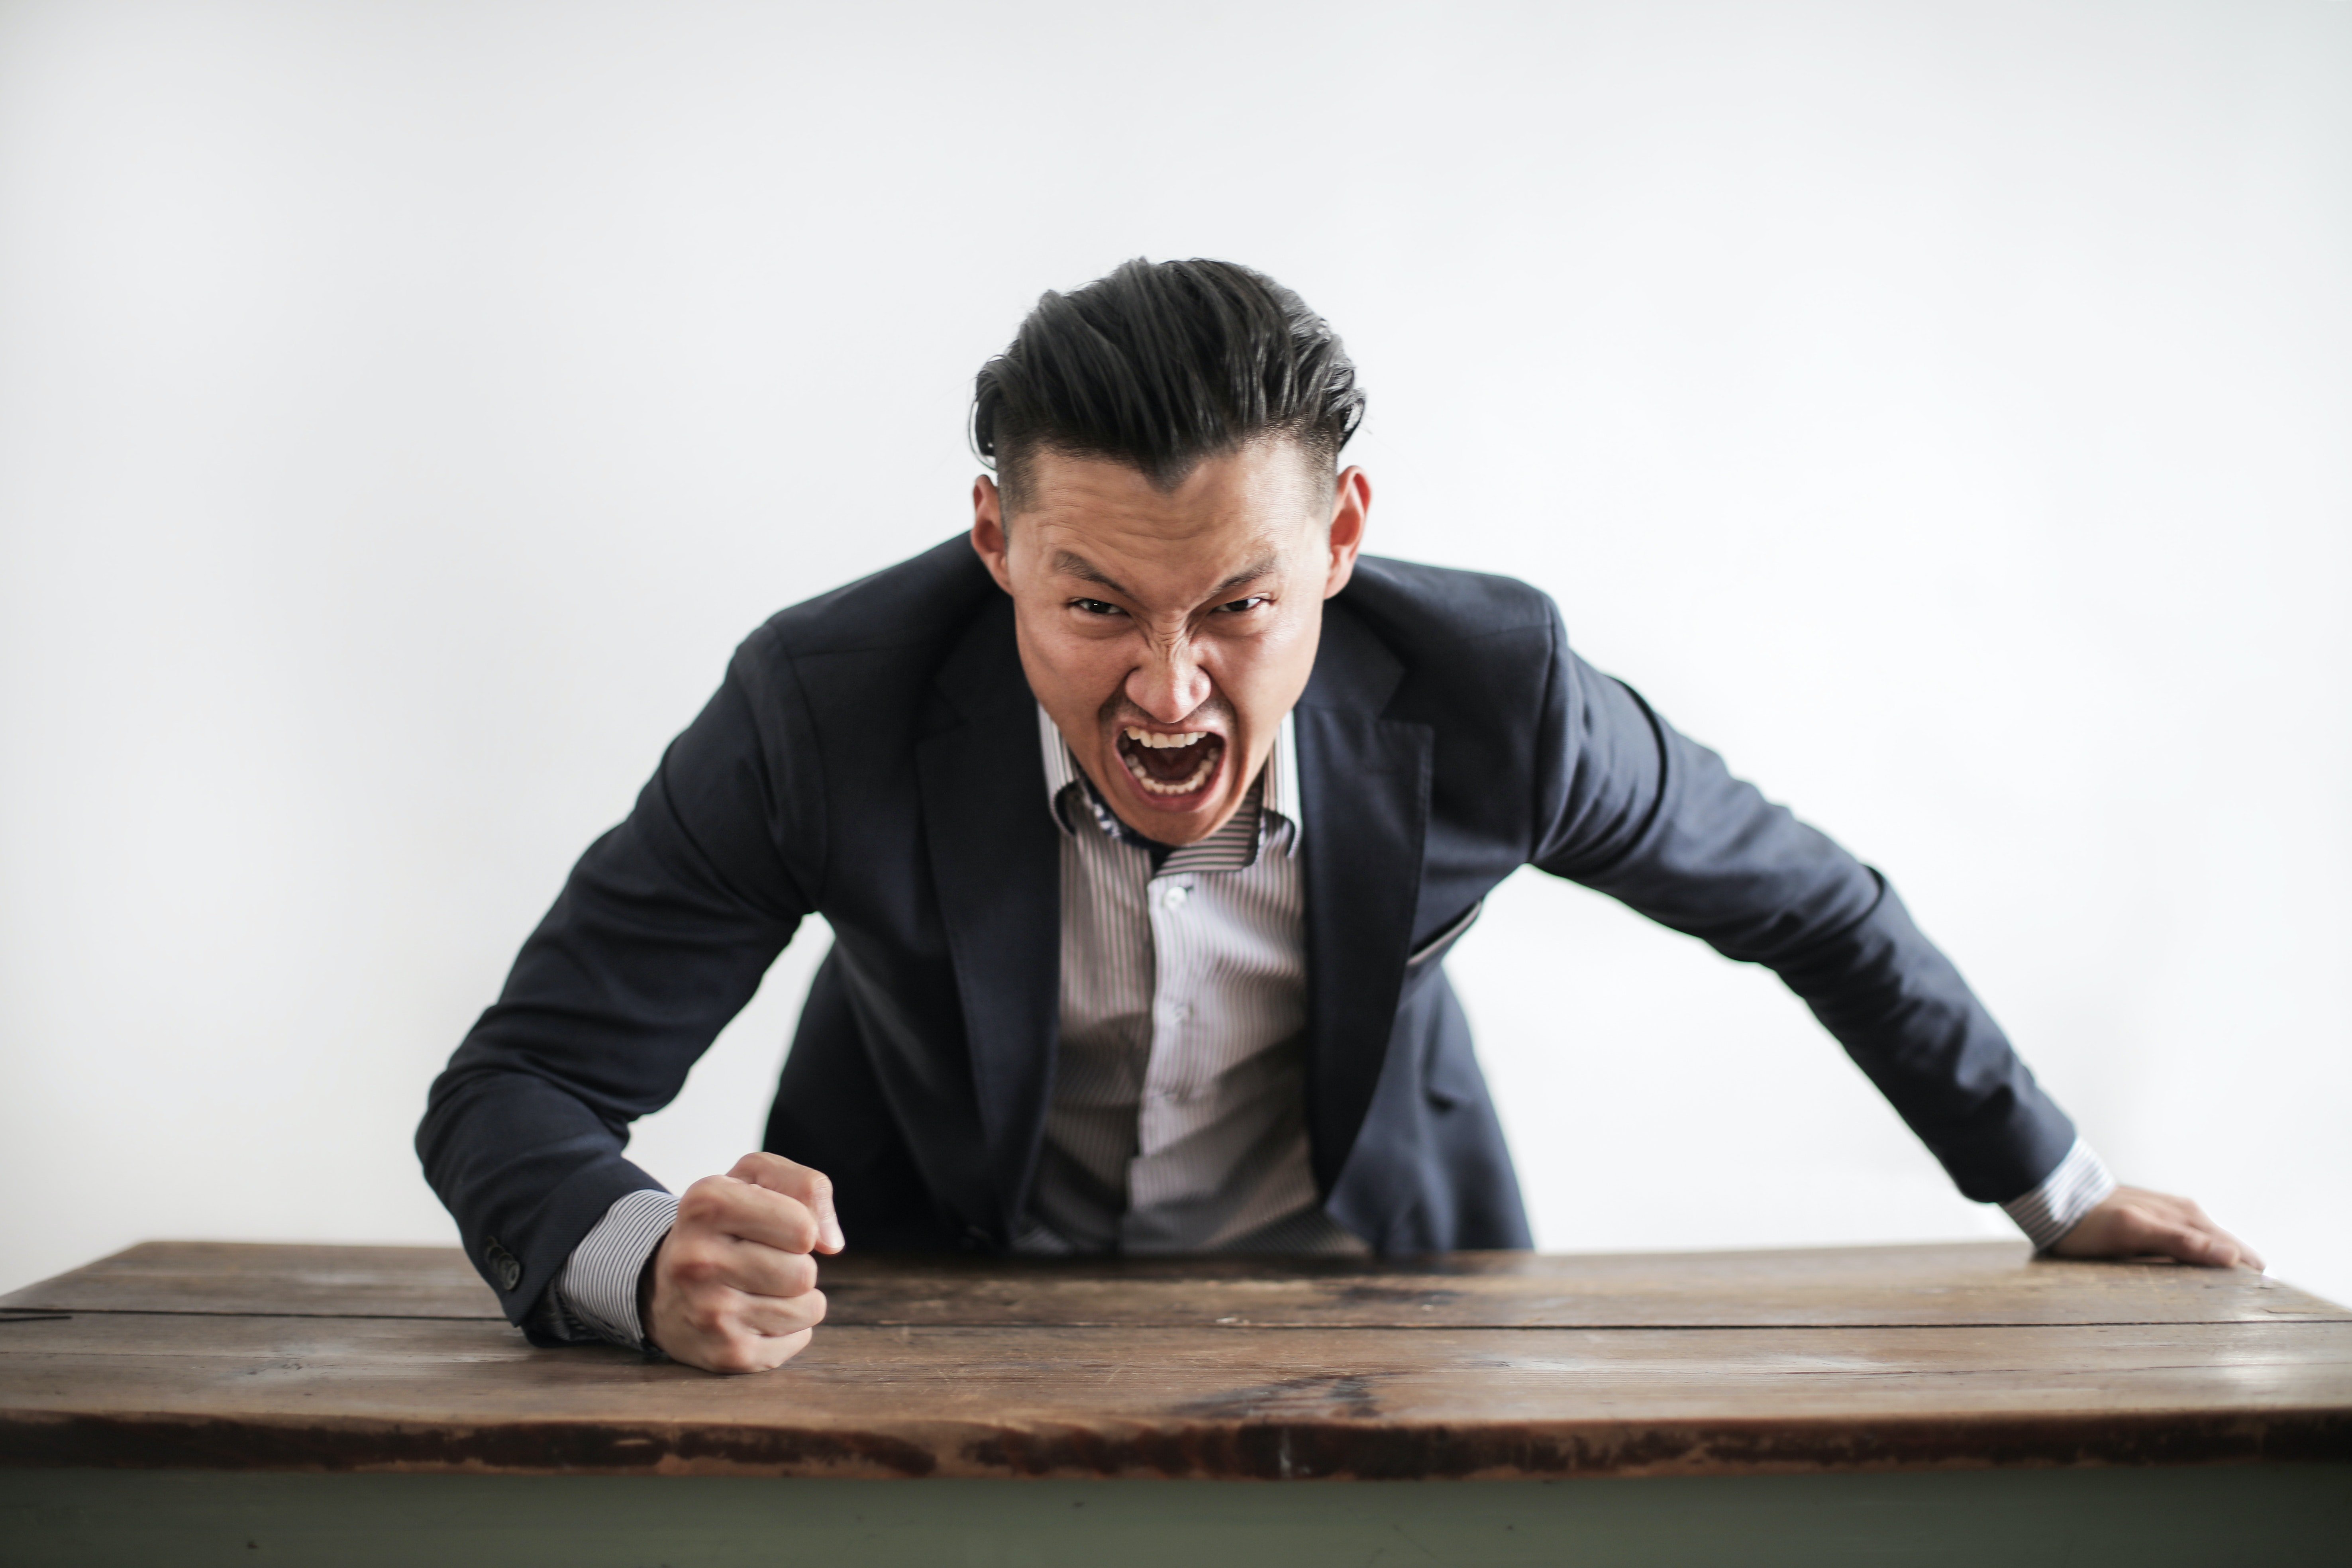 An angry man pounding his clenched fist on a table. | Photo: Pexels